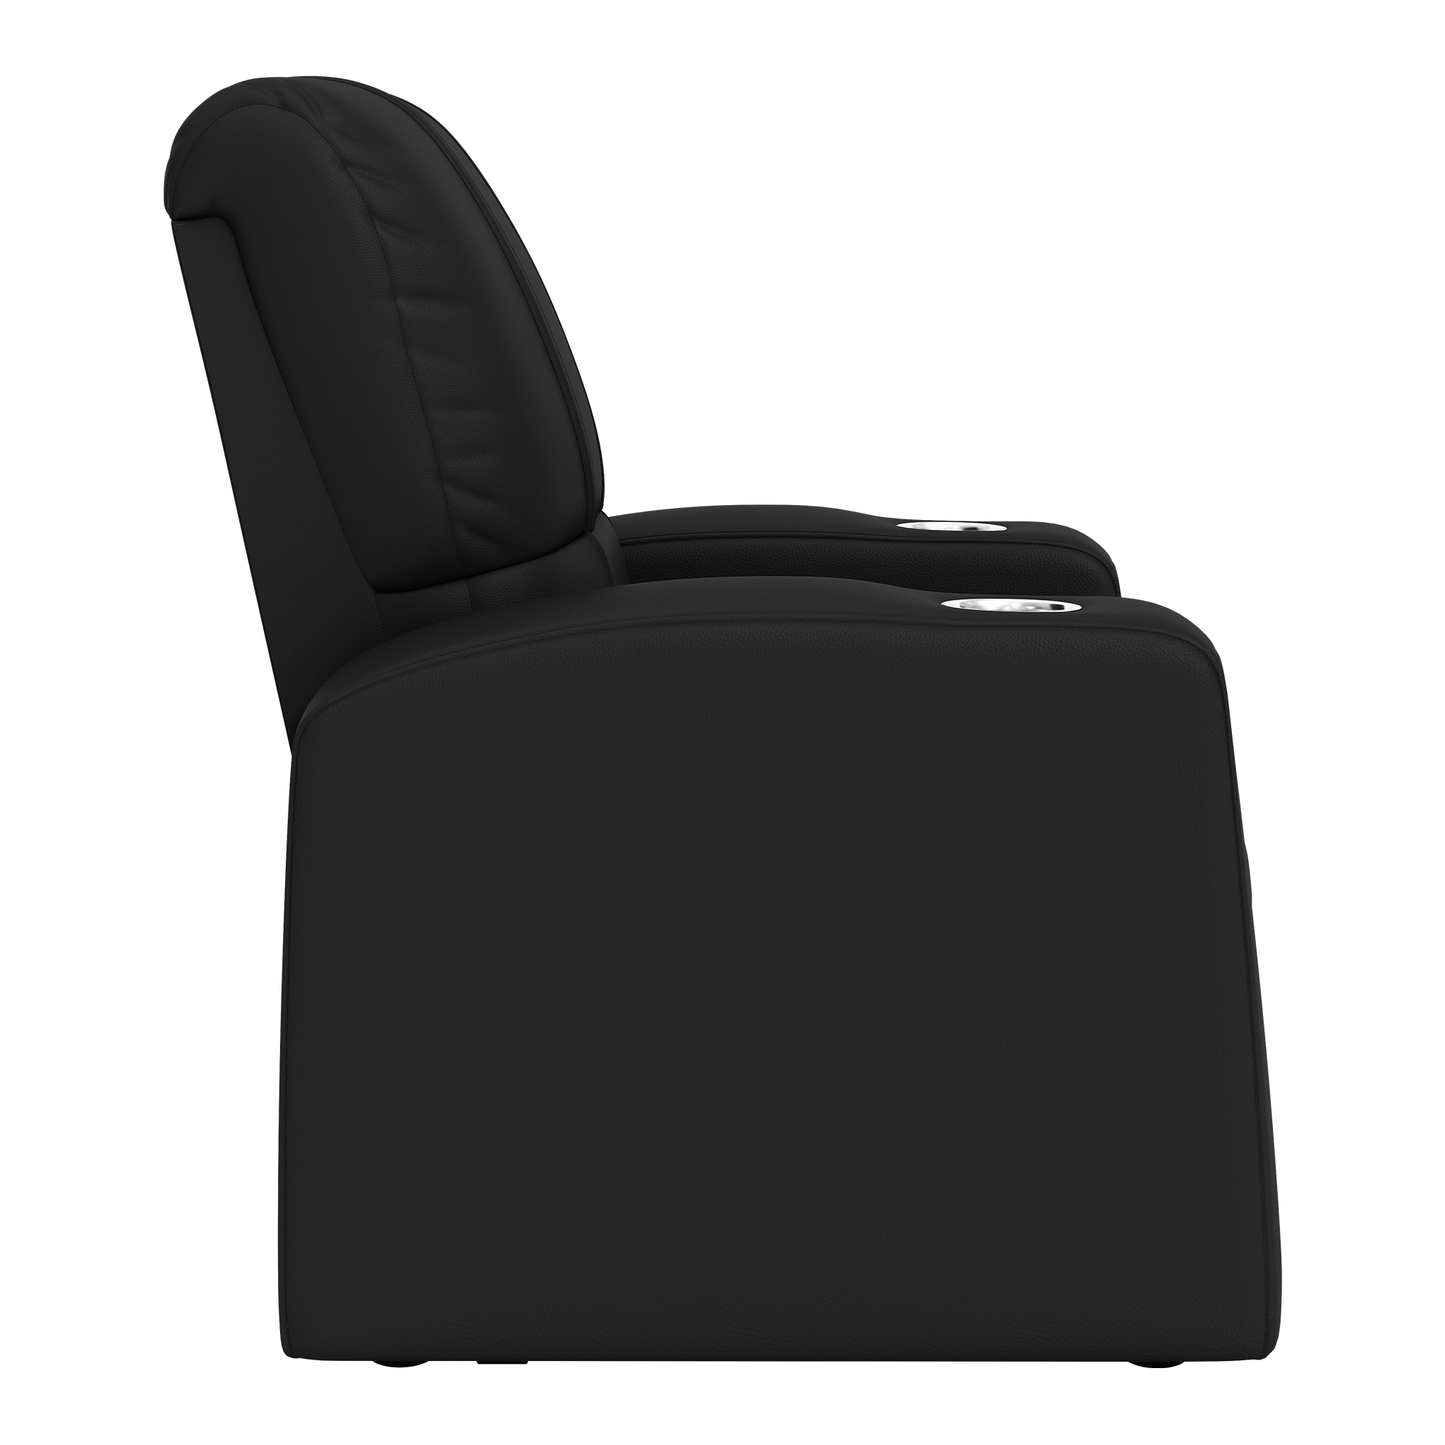 Relax Home Theater Recliner with Real Salt Lake Alternate Logo